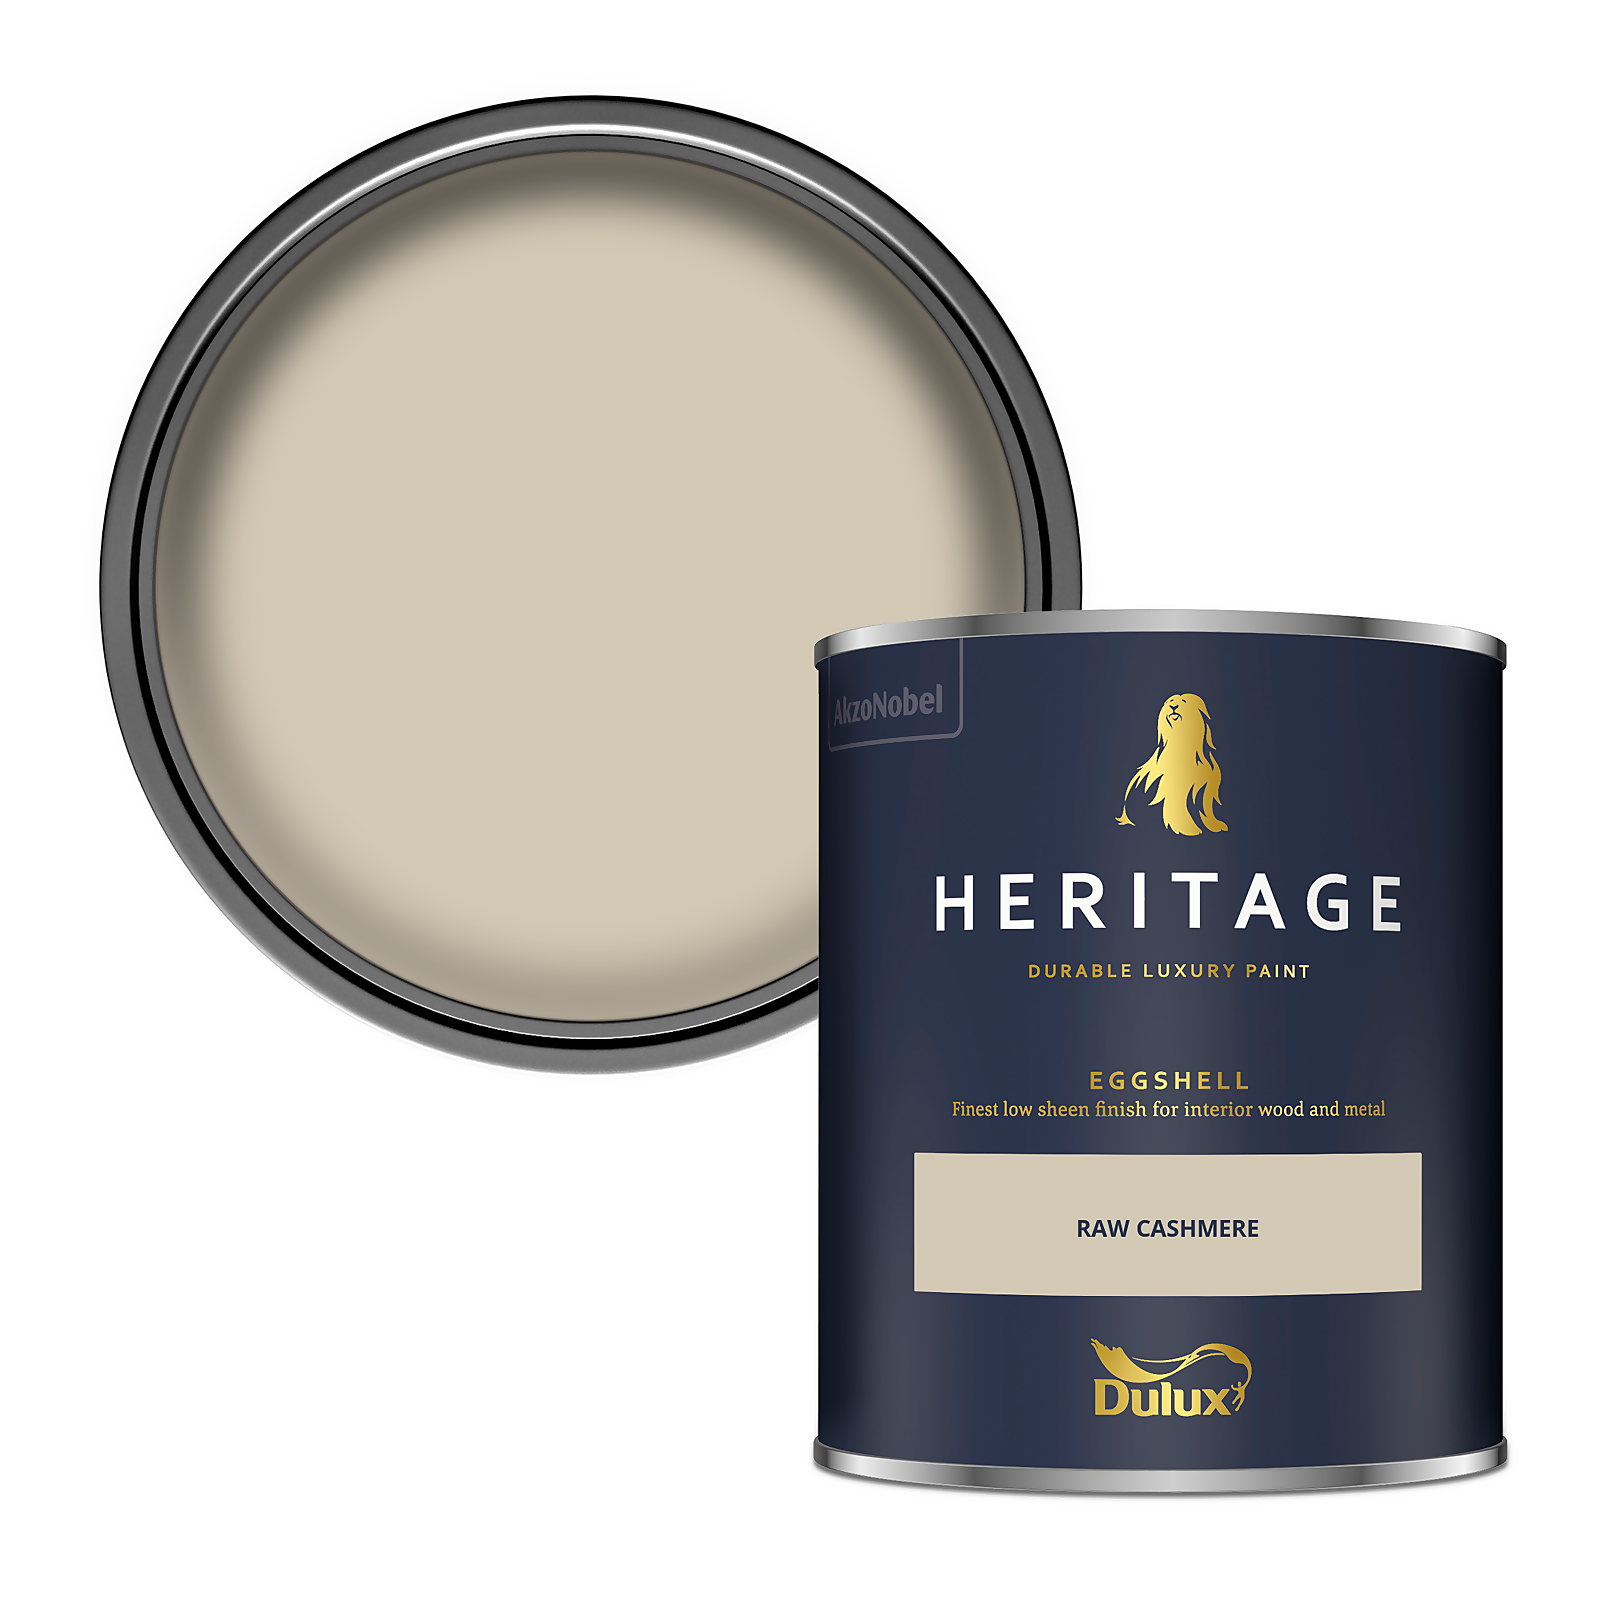 Photo of Dulux Heritage Eggshell Paint - Raw Cashmere - 750ml